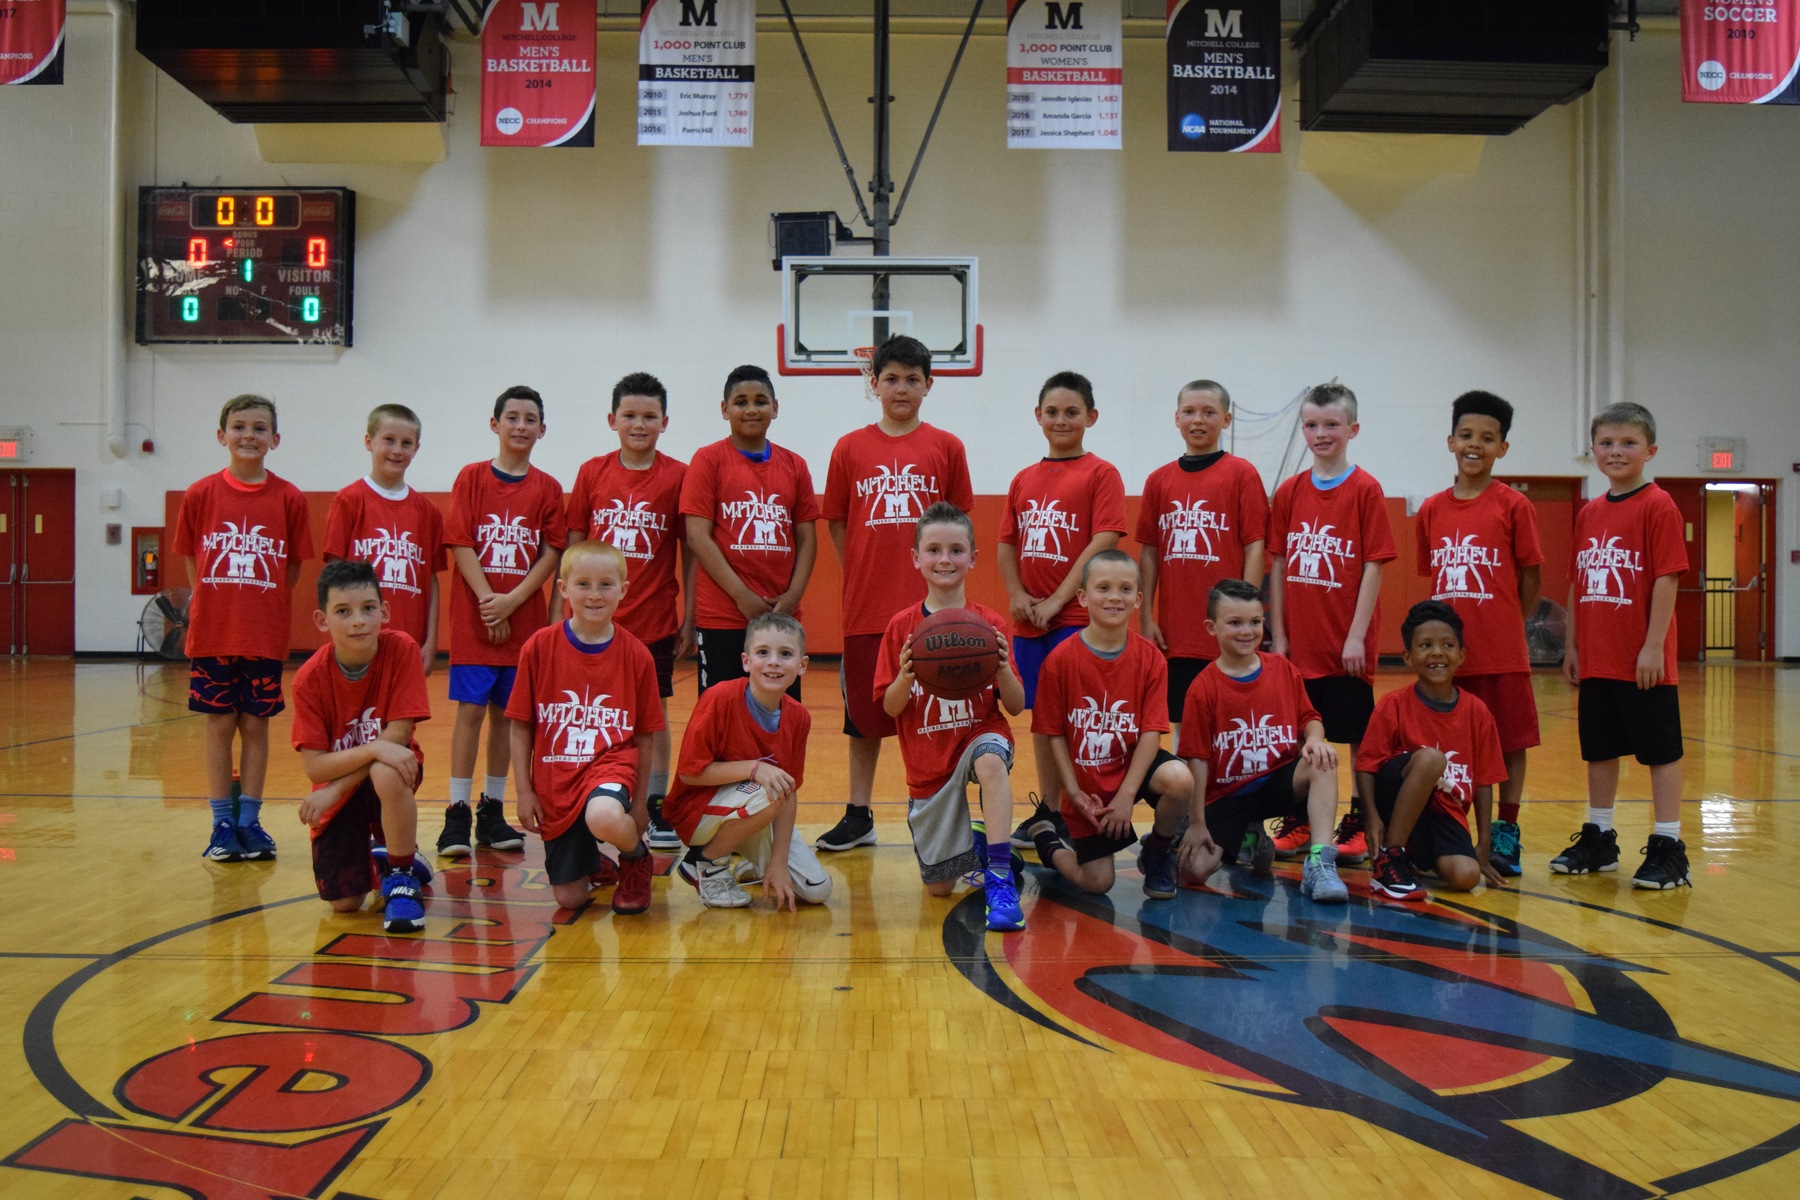 Dates Announced for 2019 Mitchell Basketball Skills Academy